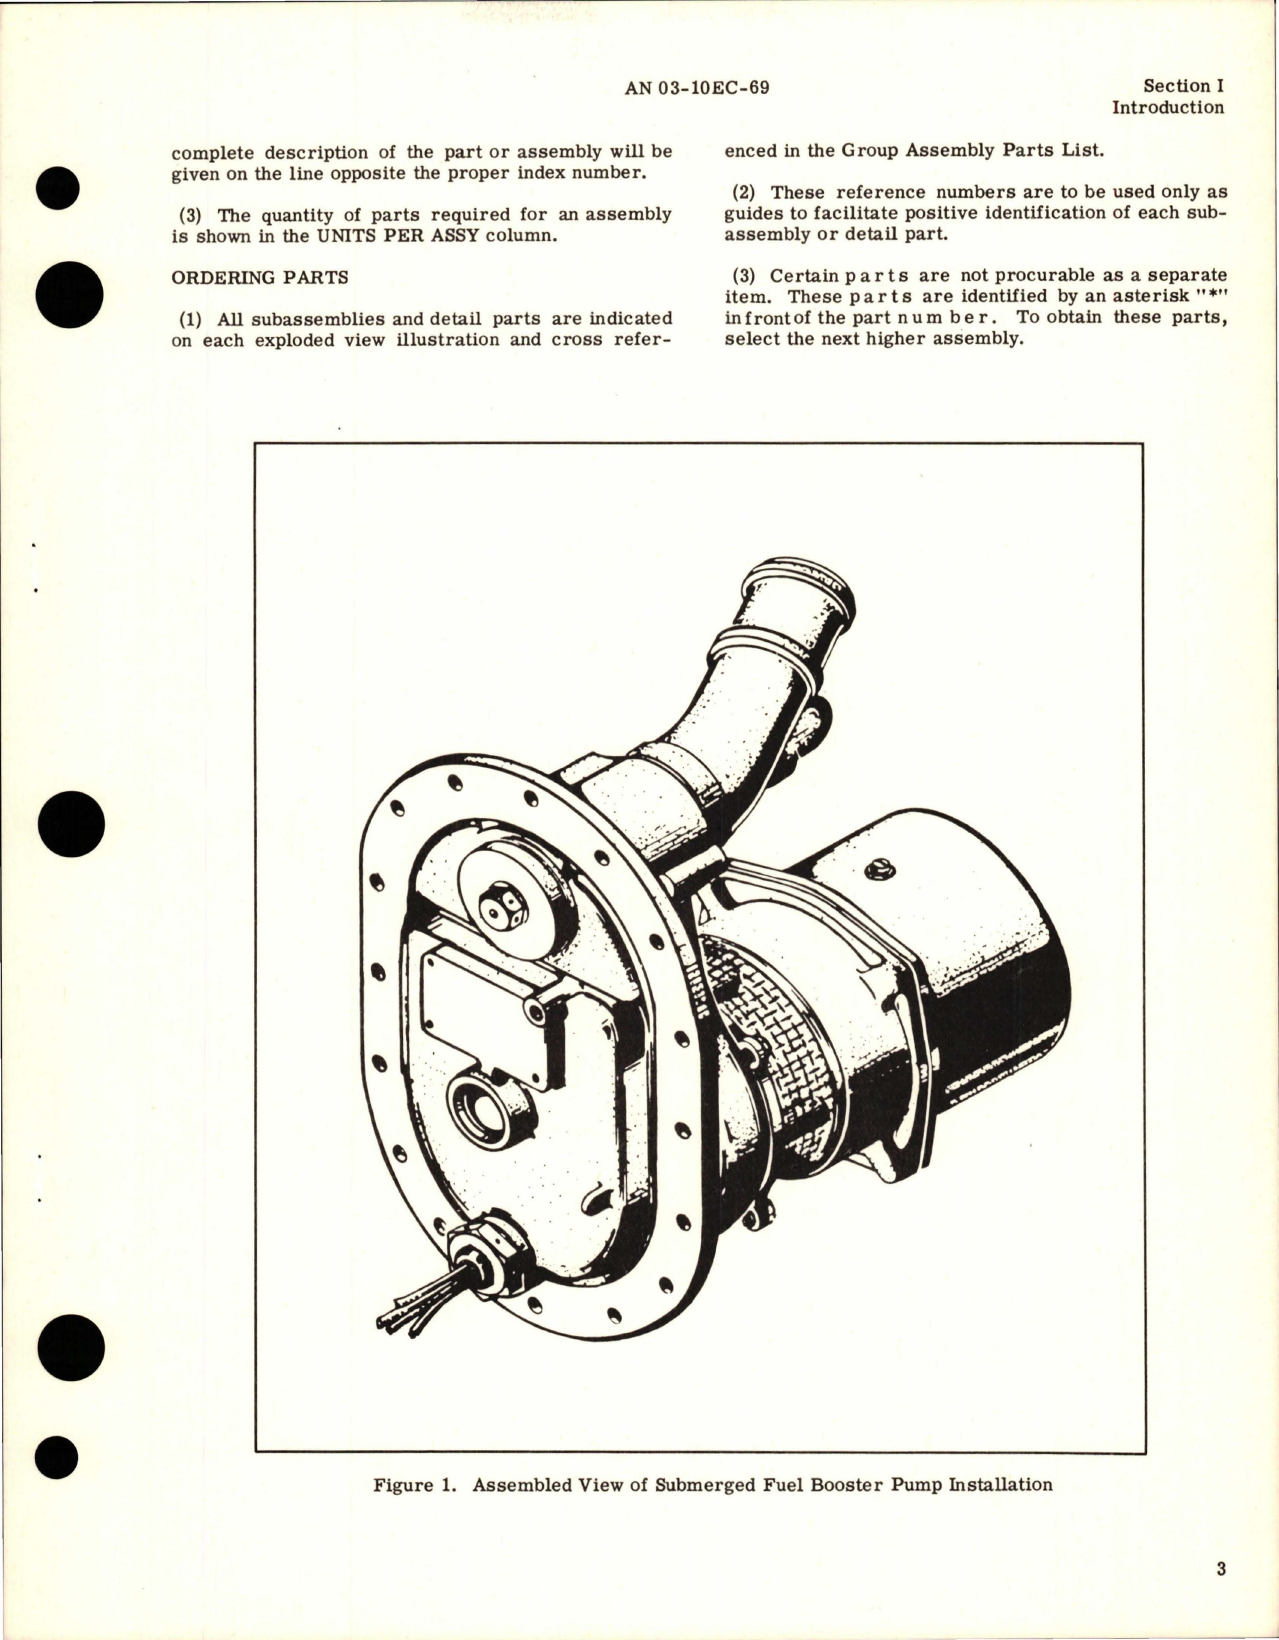 Sample page 5 from AirCorps Library document: Illustrated Parts Breakdown for Submerged Fuel Booster Pump - Models TF57000-1, TF59700, and TF59700-1